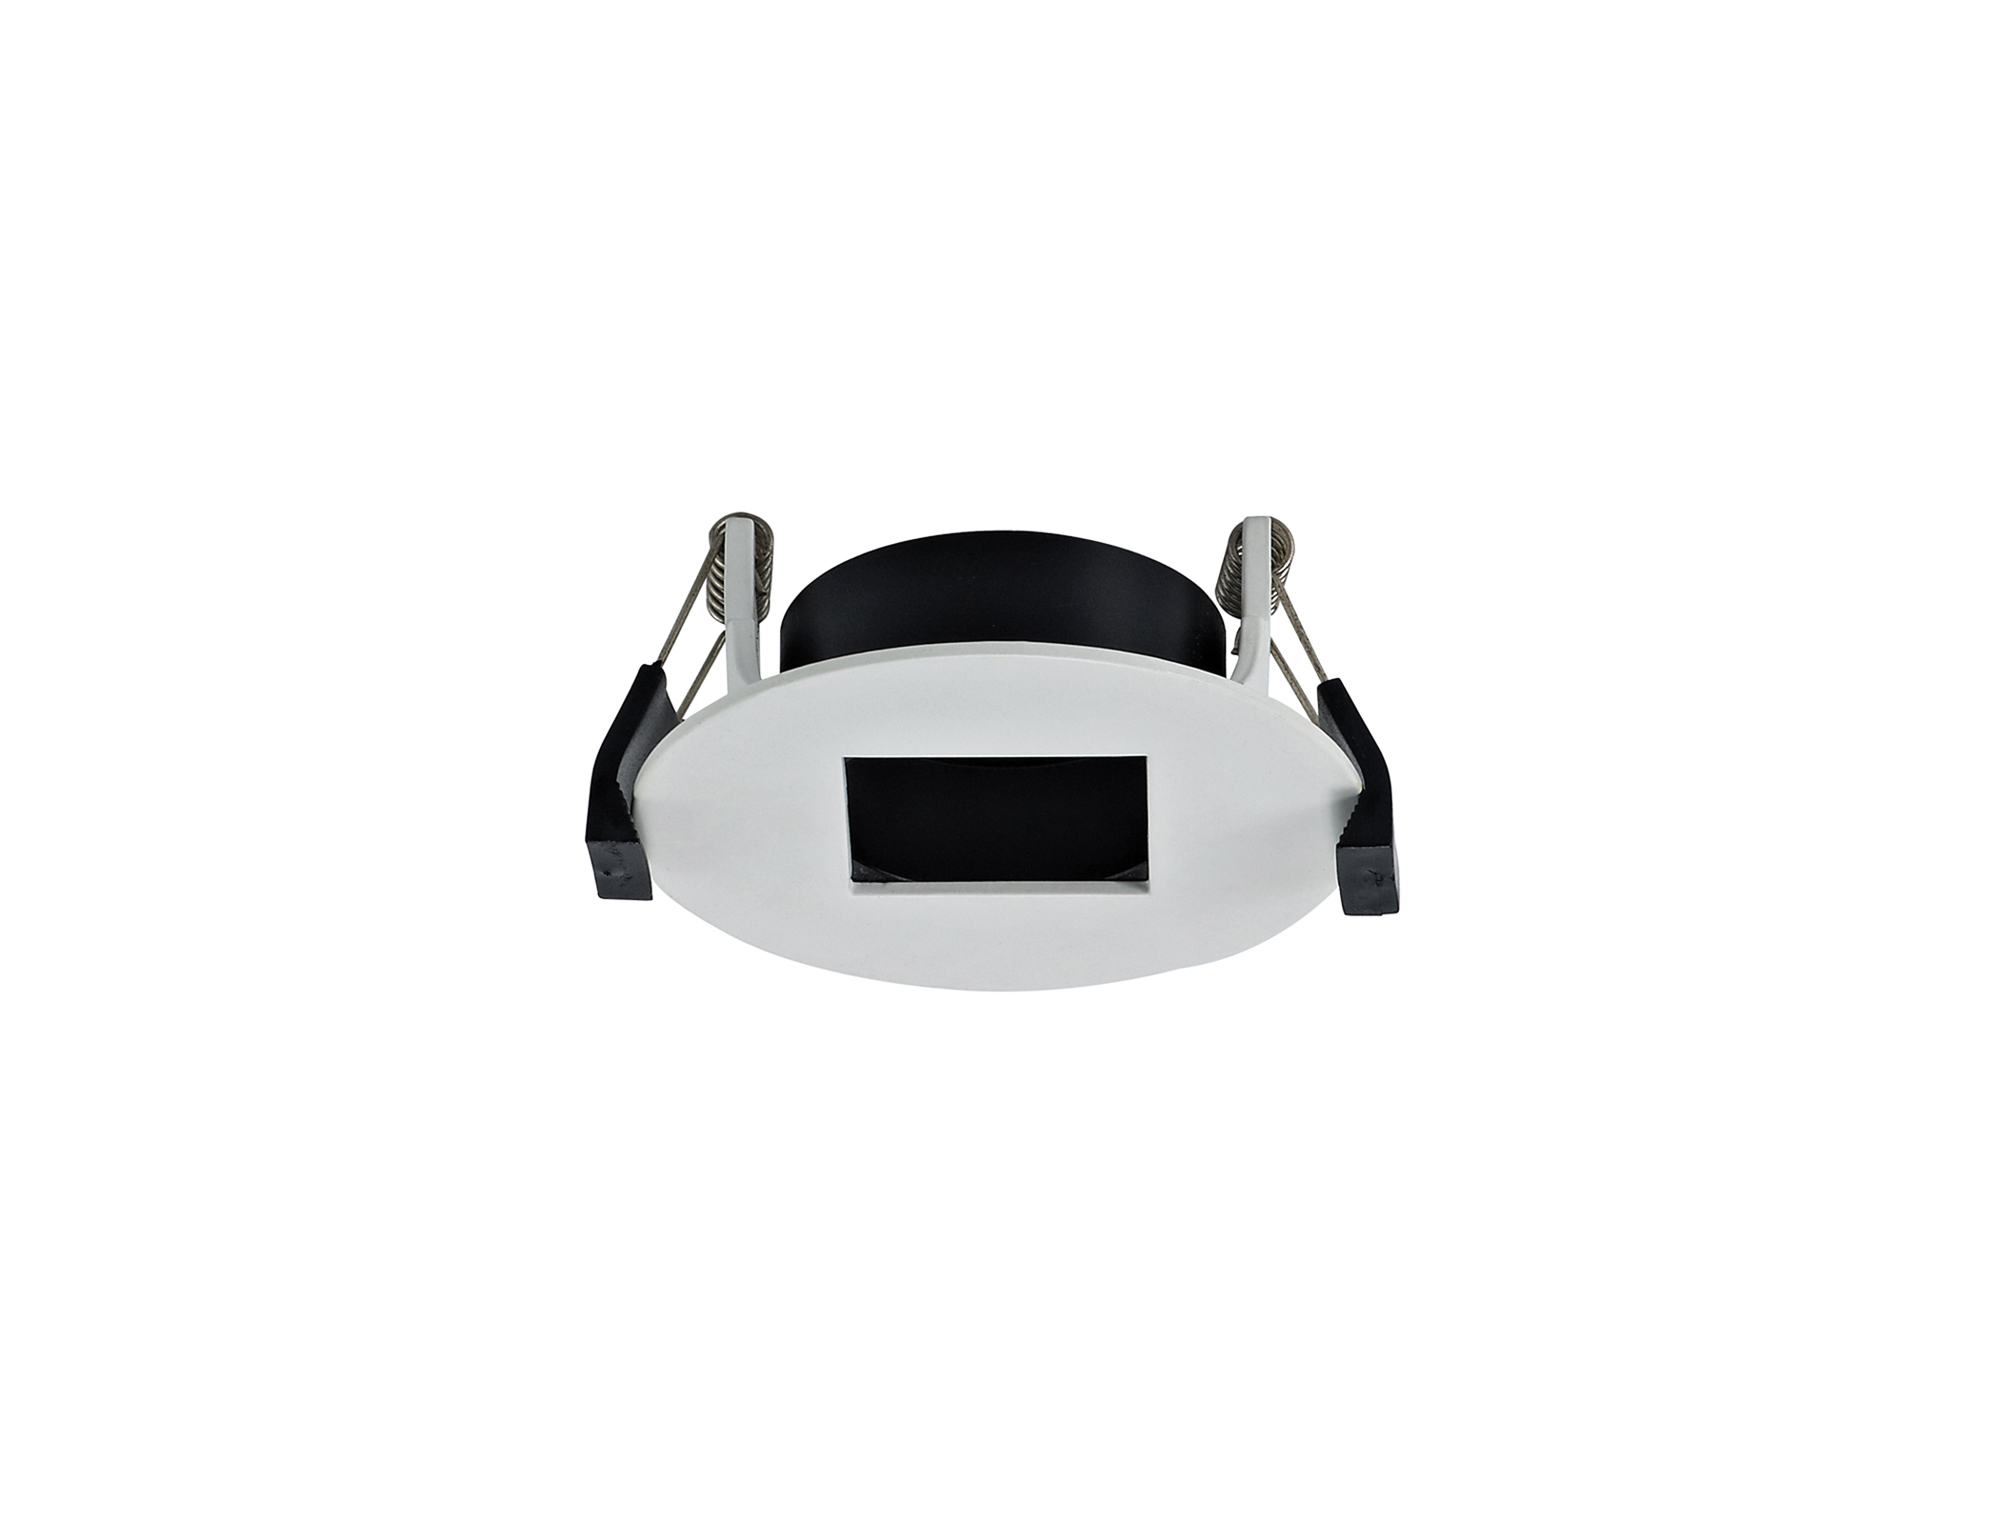 DX200368  Blate; White Recessed Round Plate with Square Pinhole Spotlight - LED ENGINE REQUIRED; Dia: 85mm; Cut Out: 76mm; 3yrs Warranty